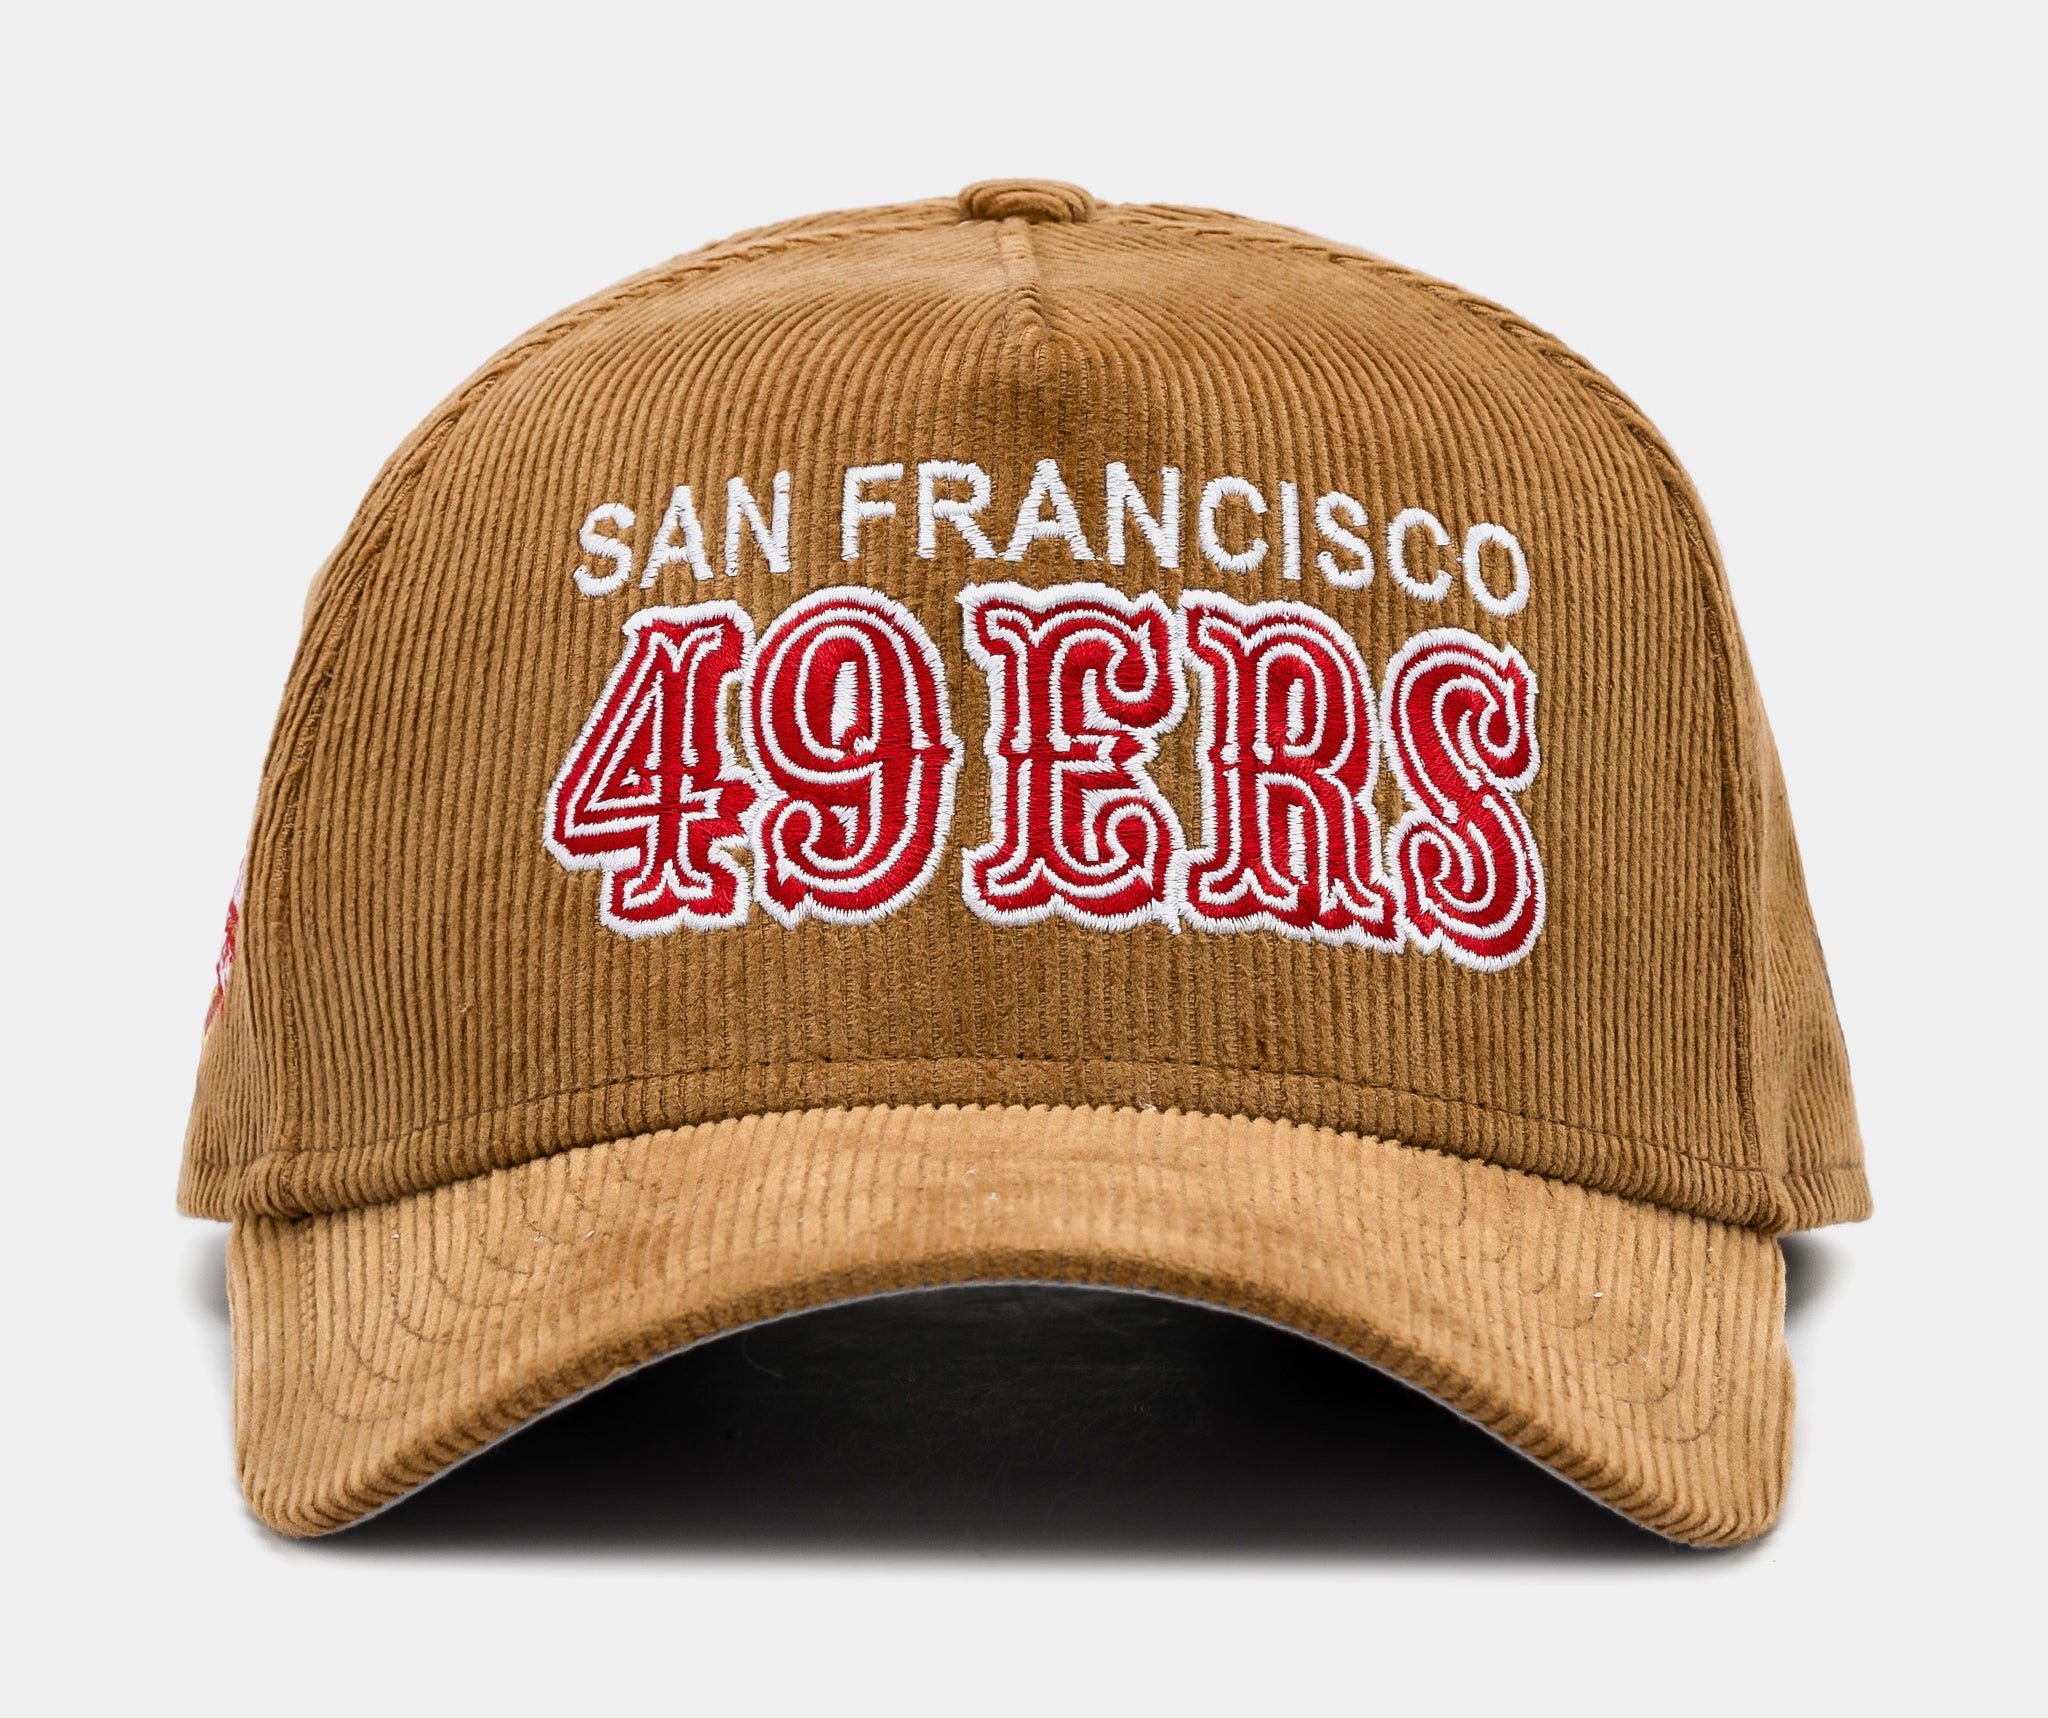 New Era San Francisco 49ers 9forty unisex cap in red